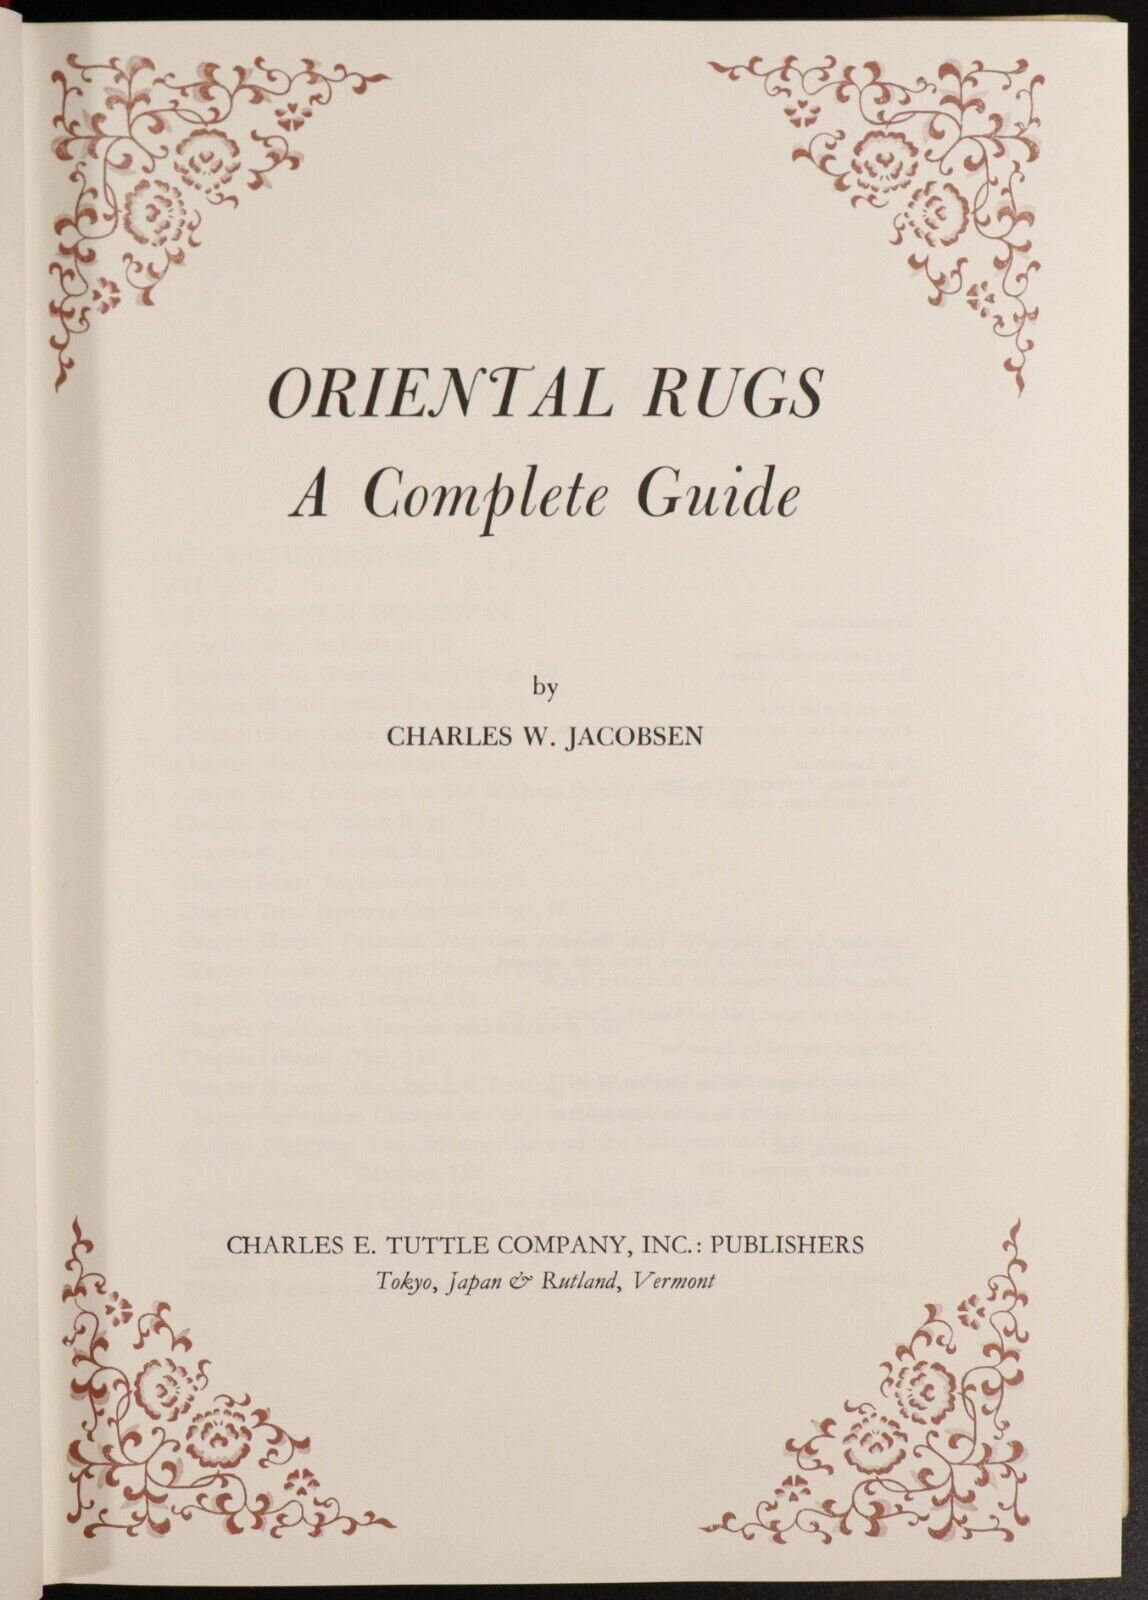 1979 Oriental Rugs: A Complete Guide by C. W. Jacobsen Reference Book - 0